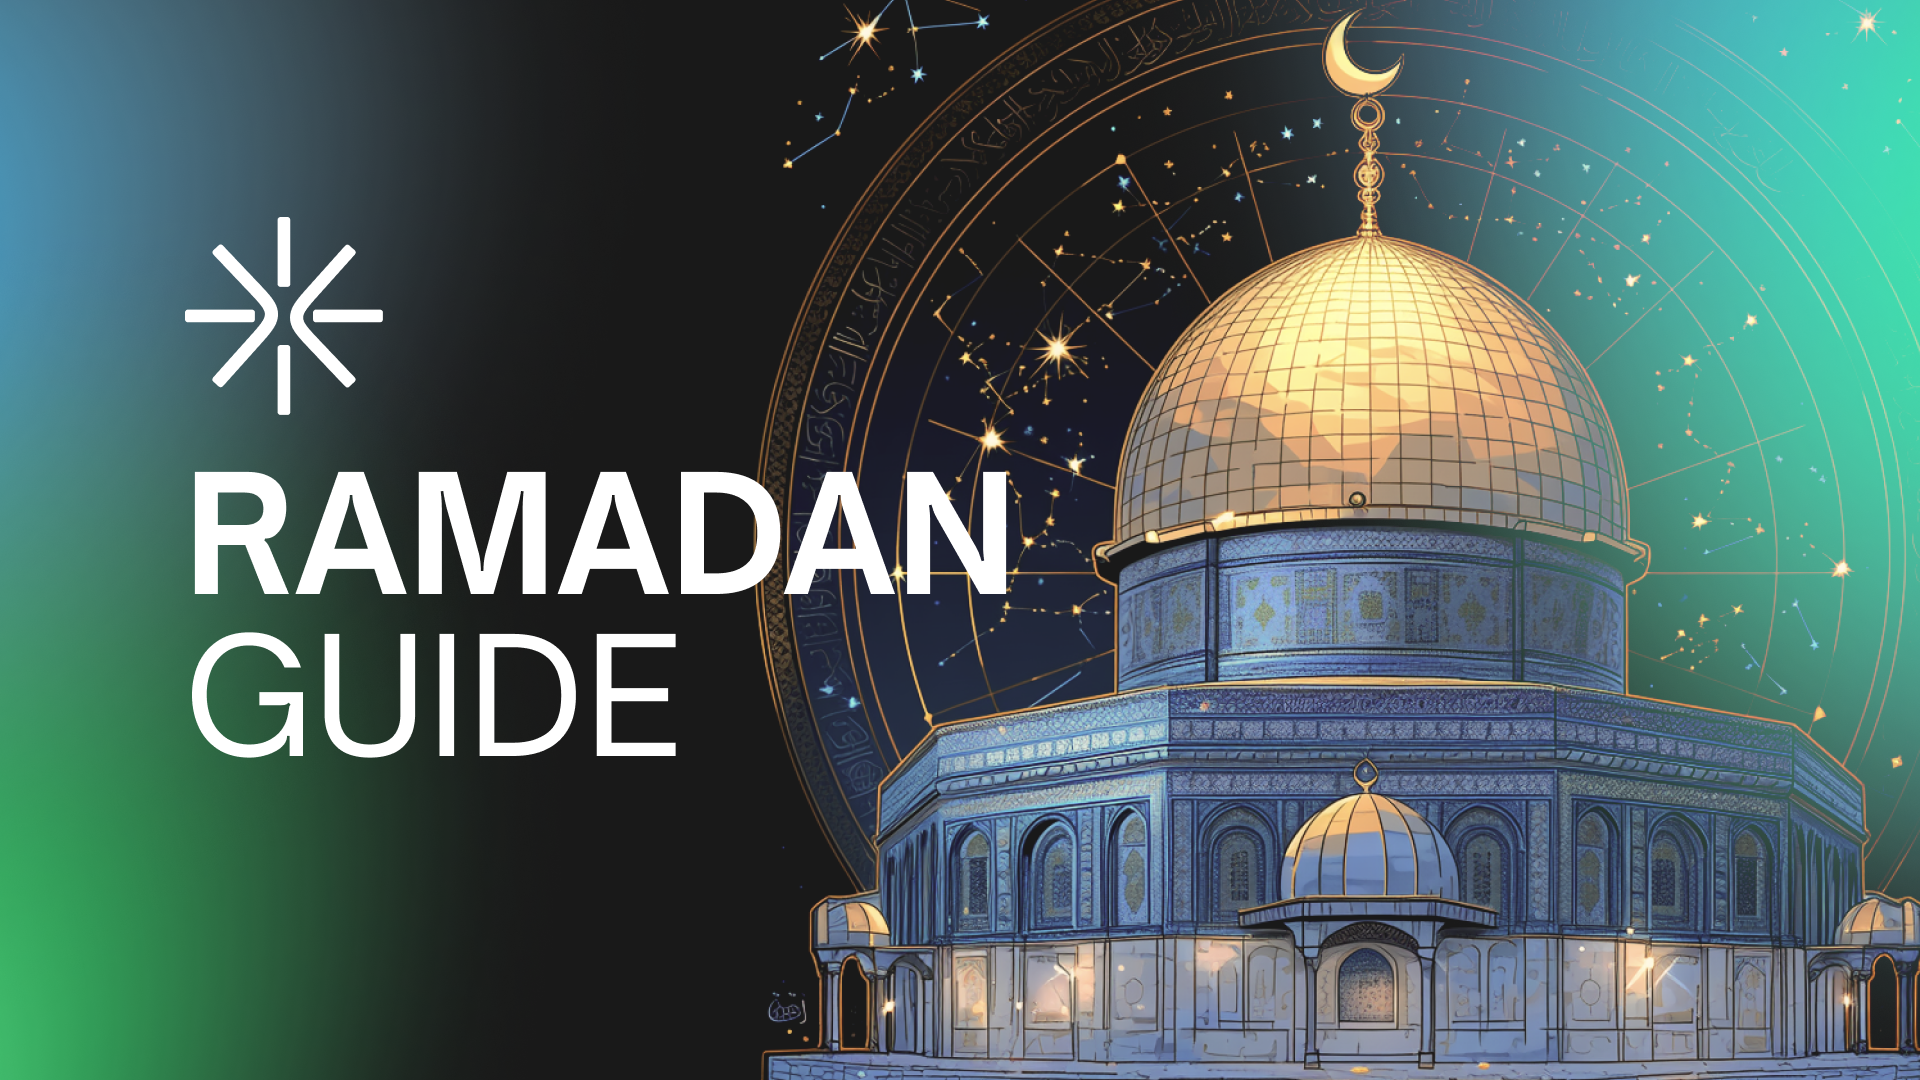 A visual depicting Masjid Al-Aqsa with constellations of stars above it. The text on top says Ramadan Guide.